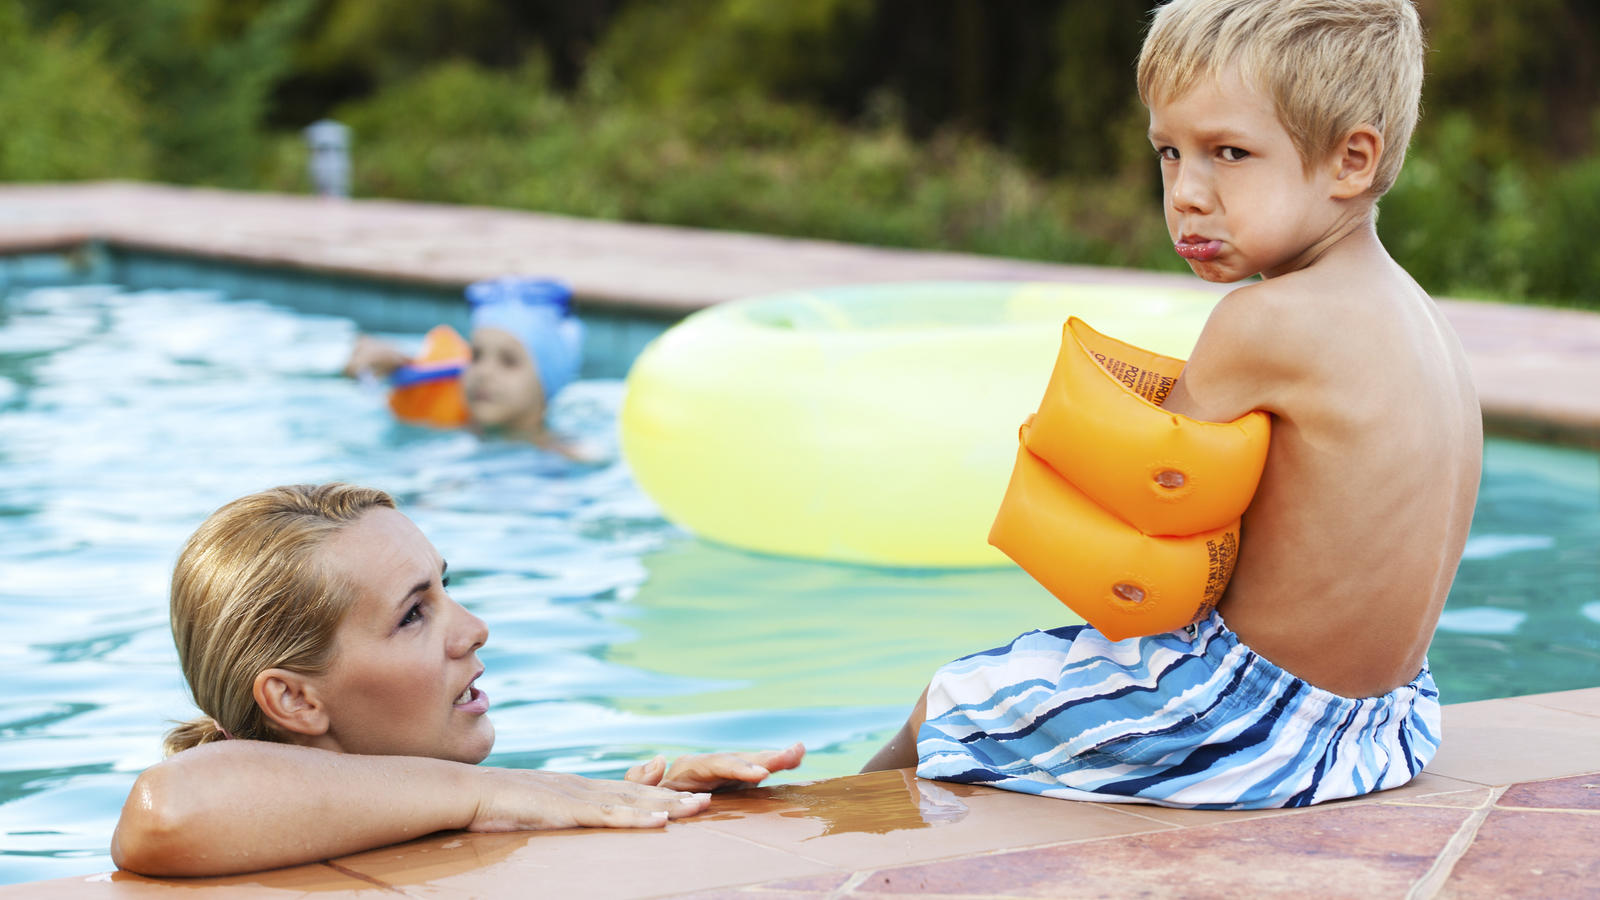 Little boy wearing water wings sitting by the swimming pool looking angry and sad, while mother talks to him.